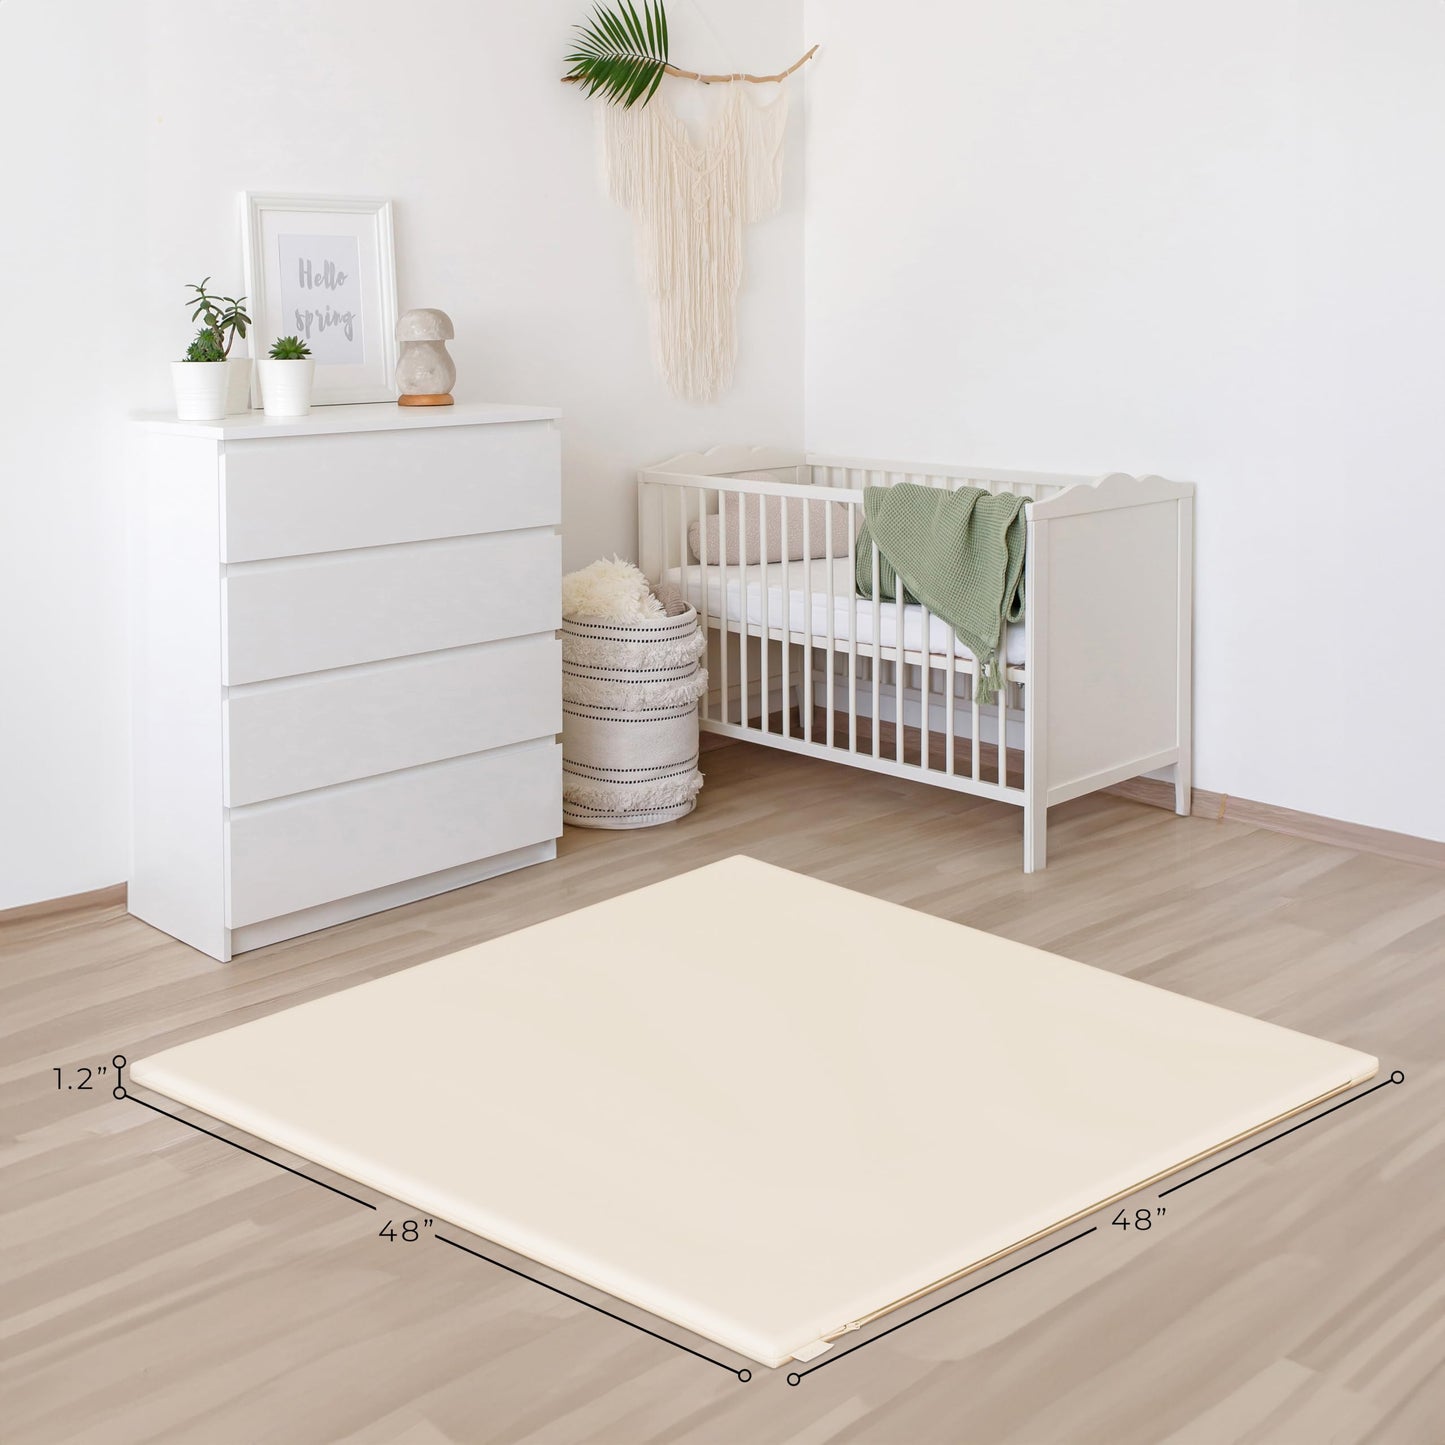 Stylish Padded Baby Play Mat for Your Boy or Girl - Extra Thick & Super Soft Vegan Leather Floor Mat Creates A Safe Play Area for Little Ones - A Beautiful Playmat That Fits Nicely Into Any Playroom